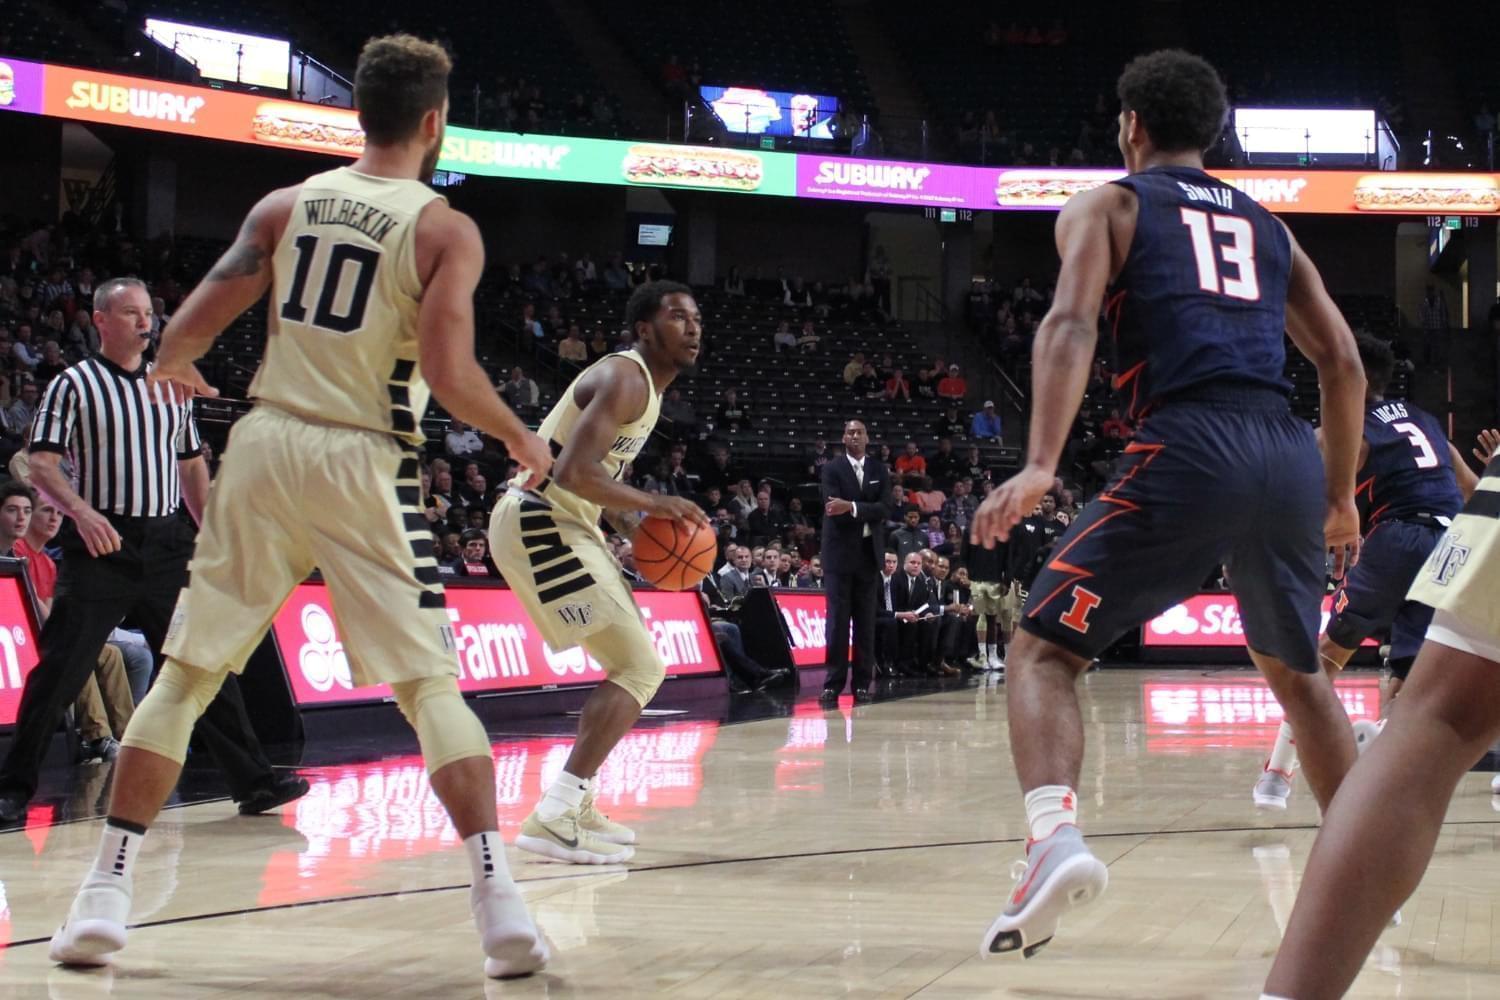 Wake Forest guard Bryant Crawford squares up for a three-pointer while Illini freshman Mark Smith defends in Illinois' 80-73 loss on Tuesday.